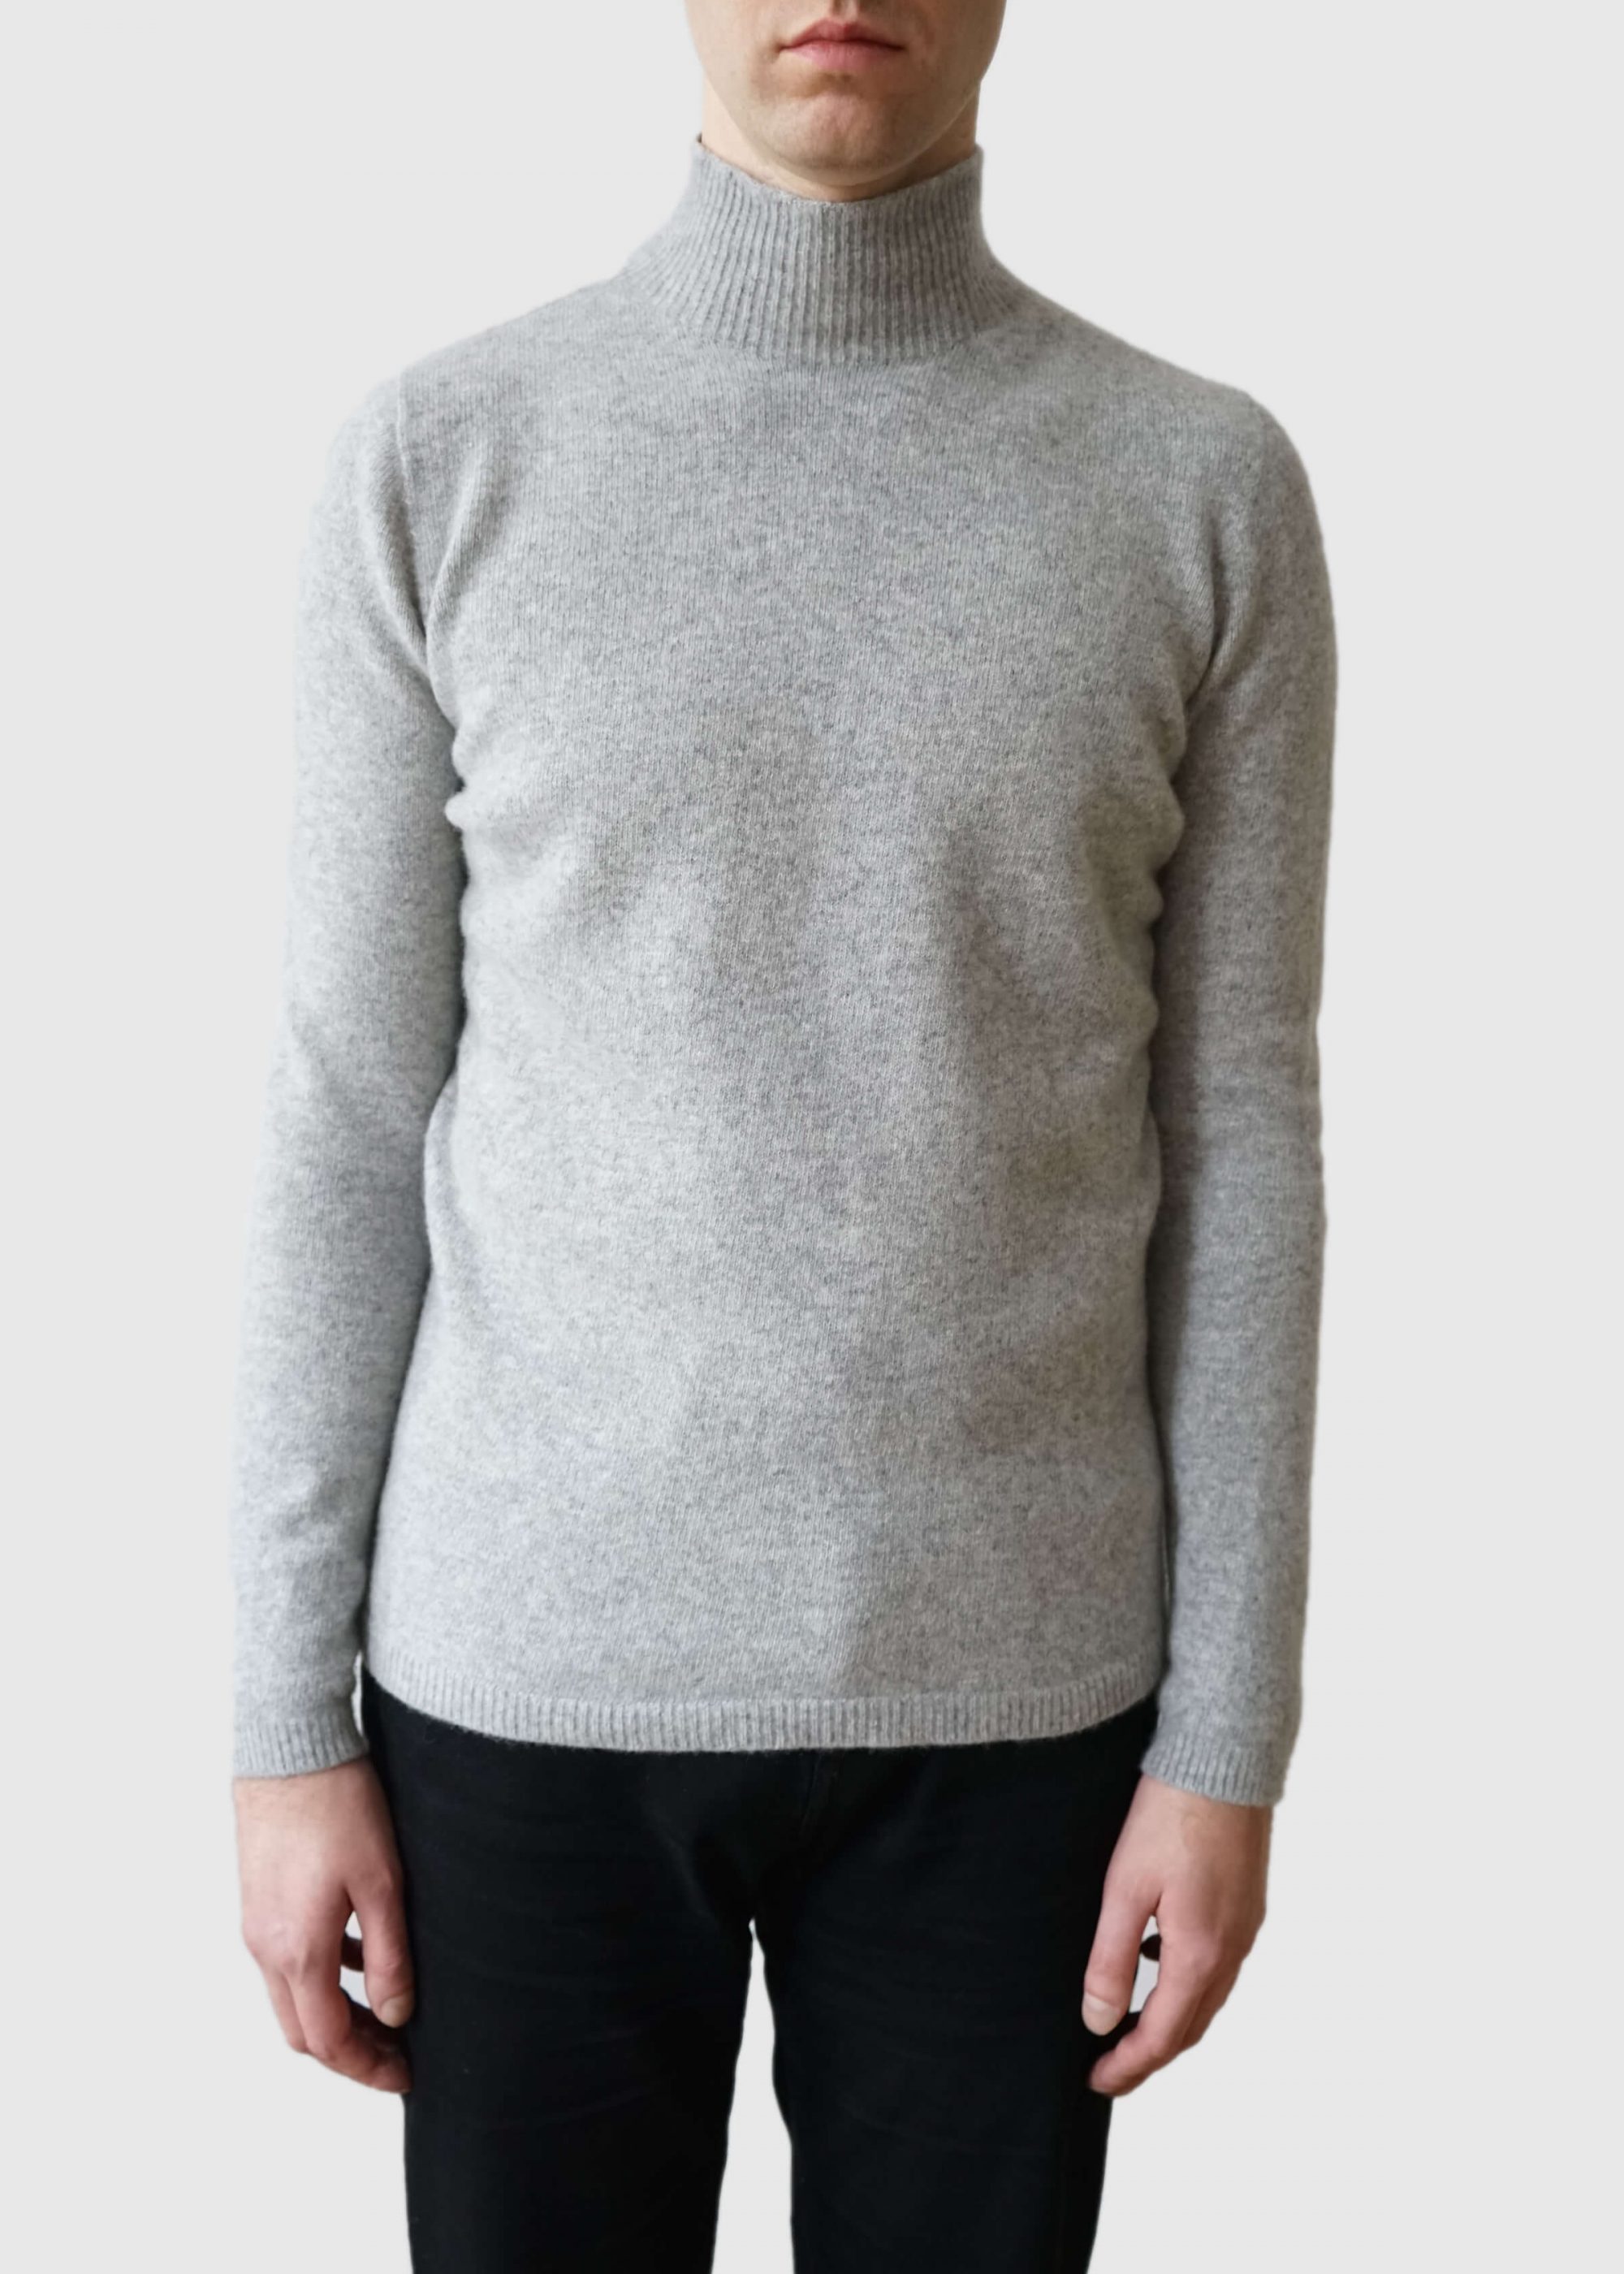 Product image for »Judd« Light Grey Polo-Neck Sweater Felted Cashmere Merino